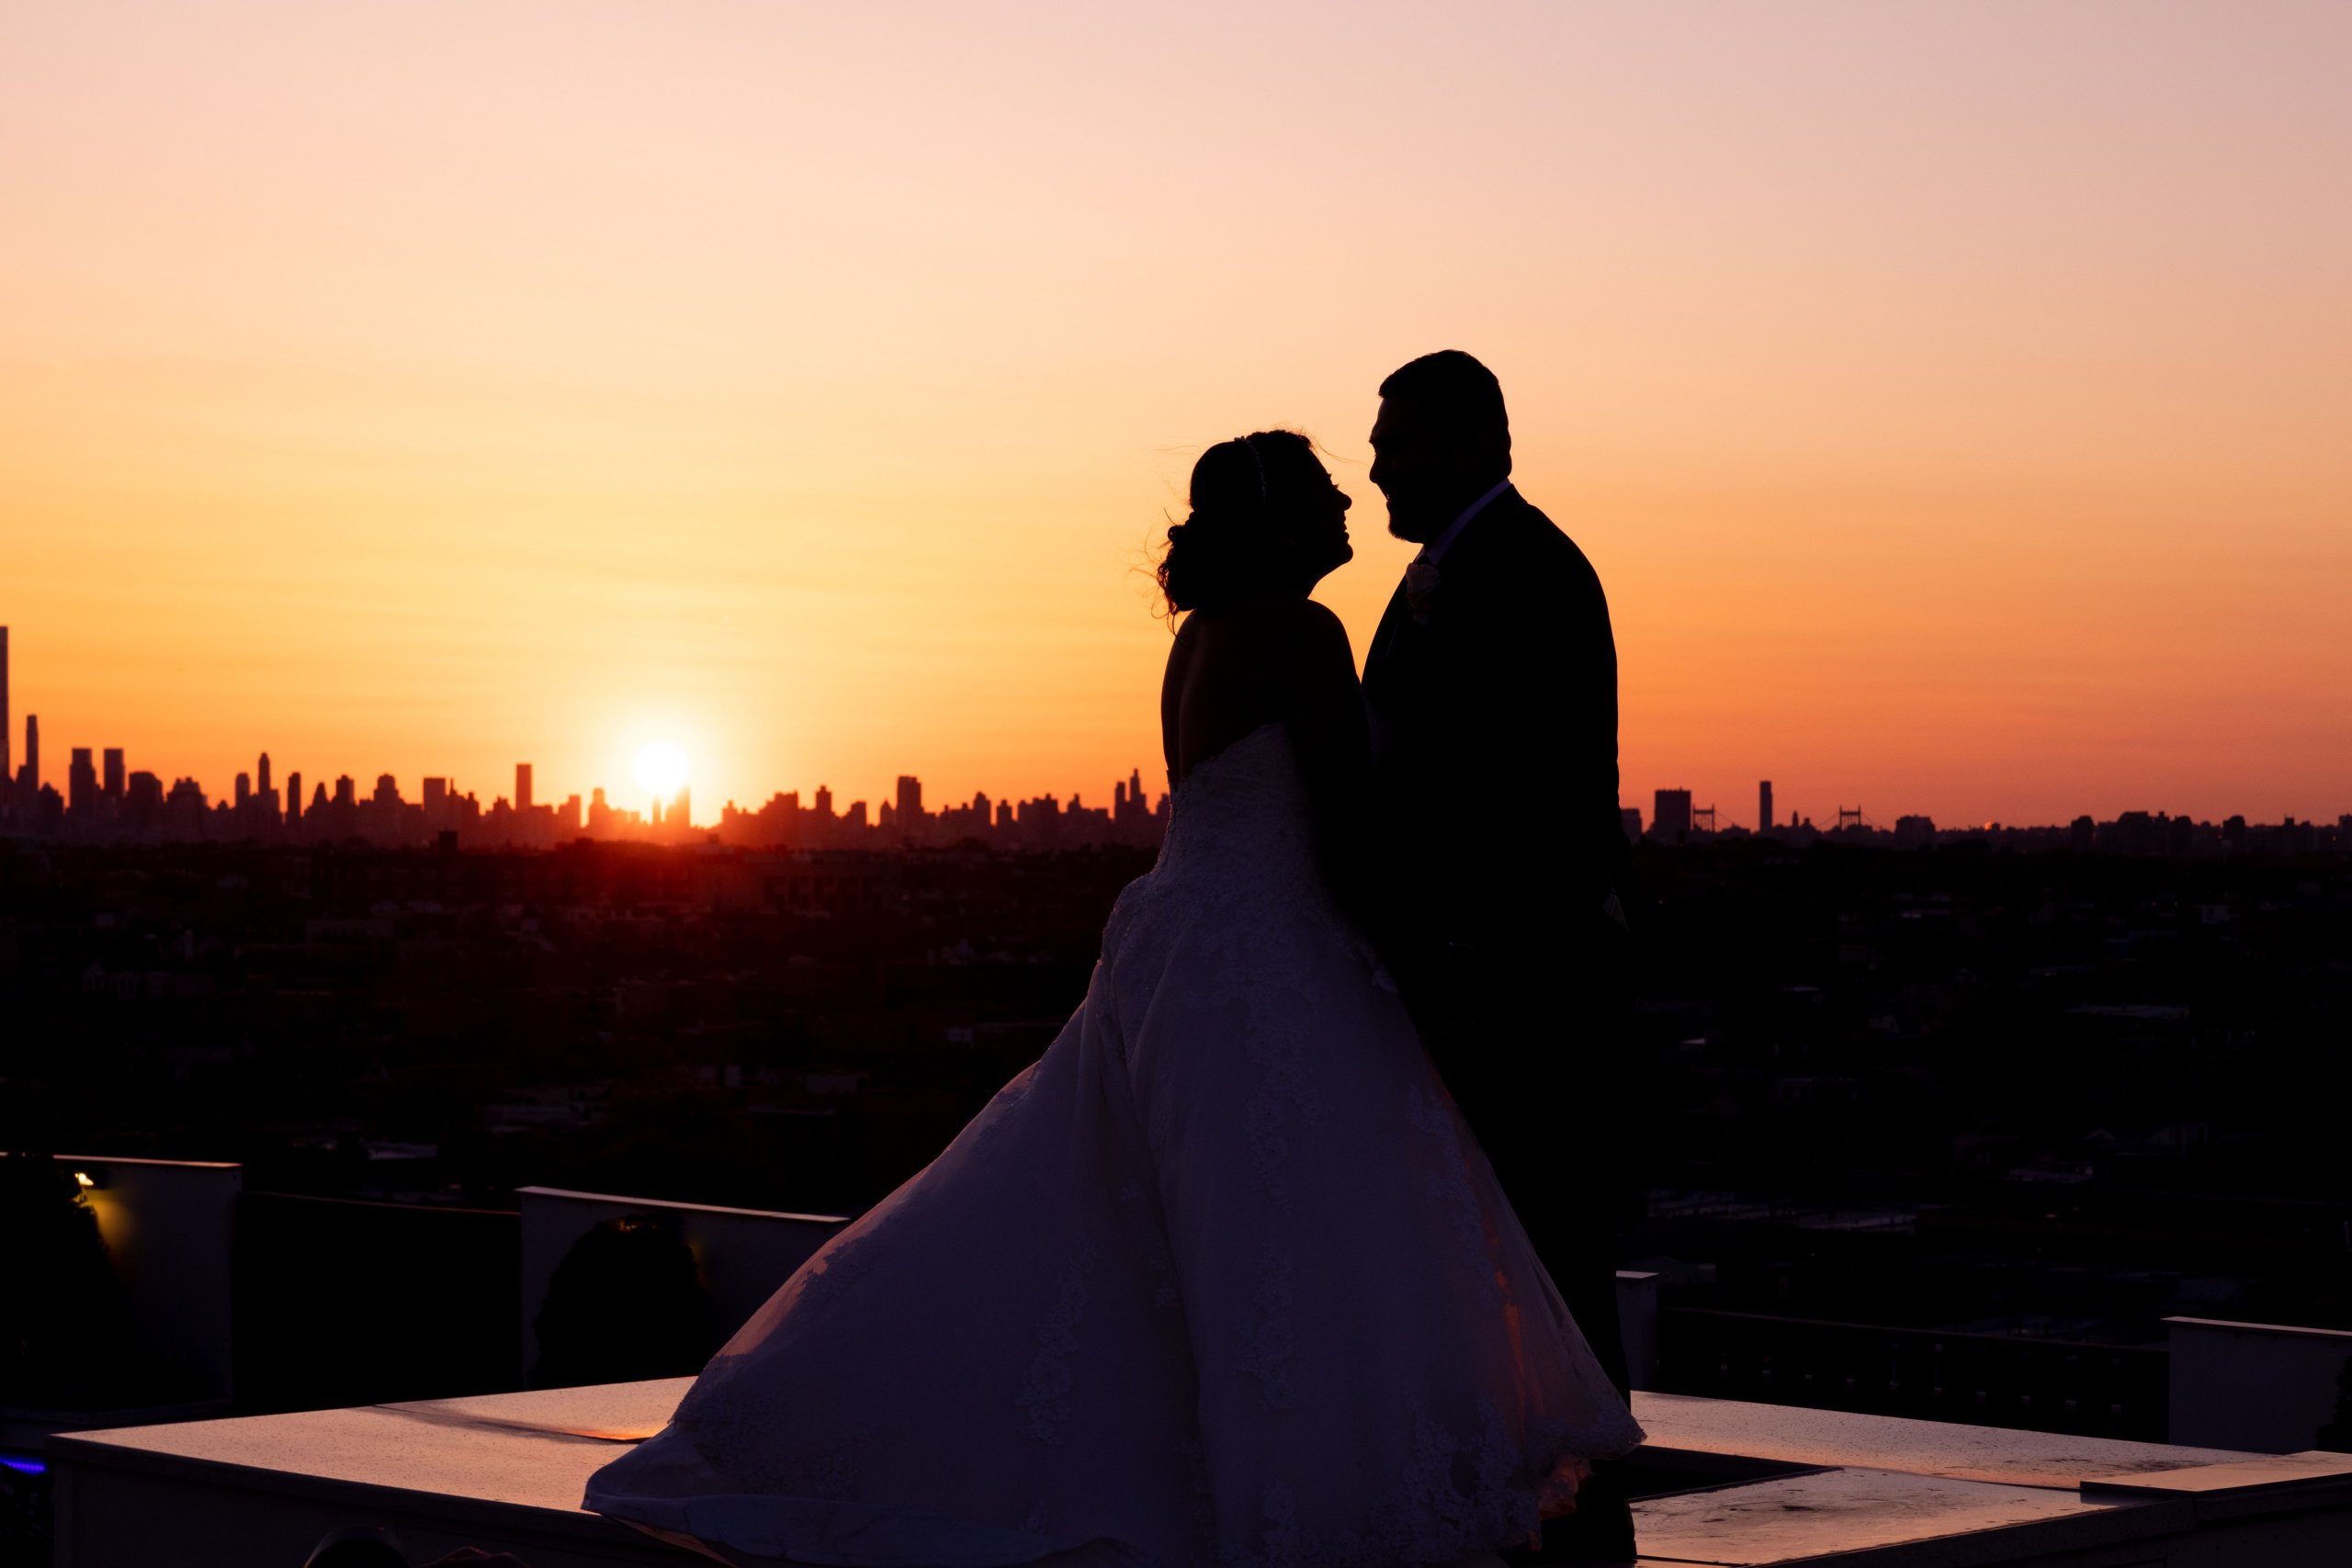 A bride and groom are silhouetted against the skyline at sunset.